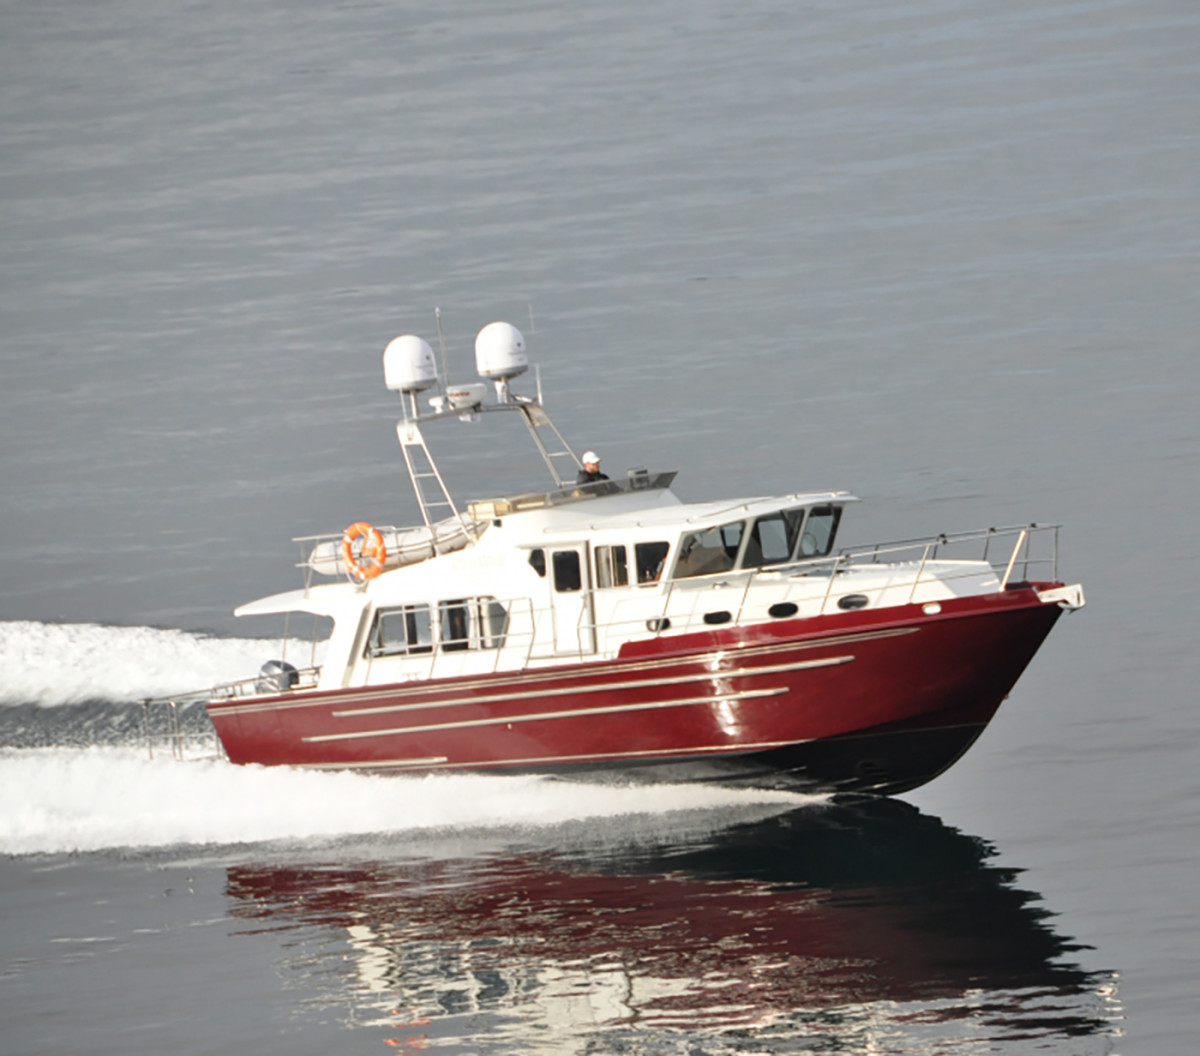 Eagle Craft manufactures this salty-looking 43 Pilothouse Cruiser. It is made completely from aluminum. 